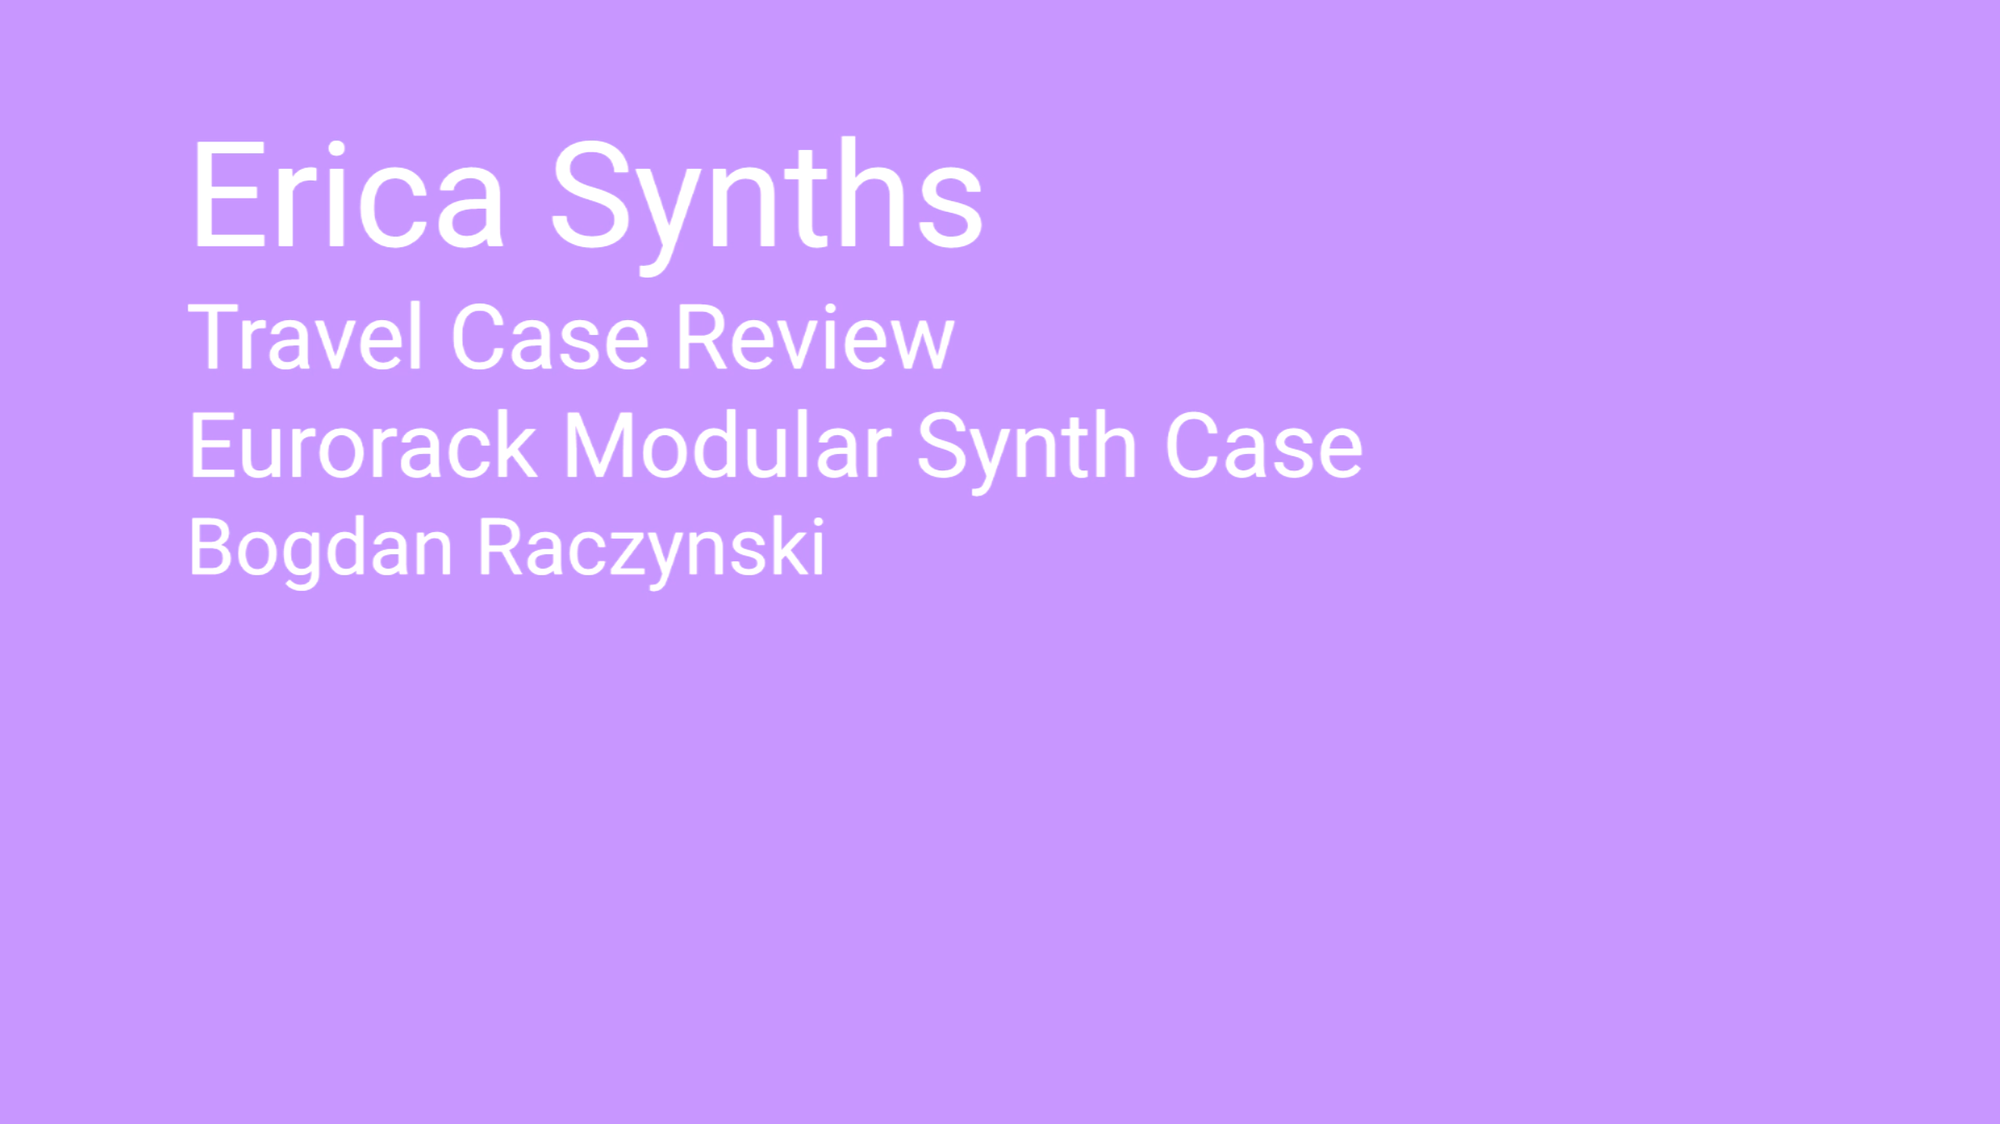 Erica Synths Travel Case Review